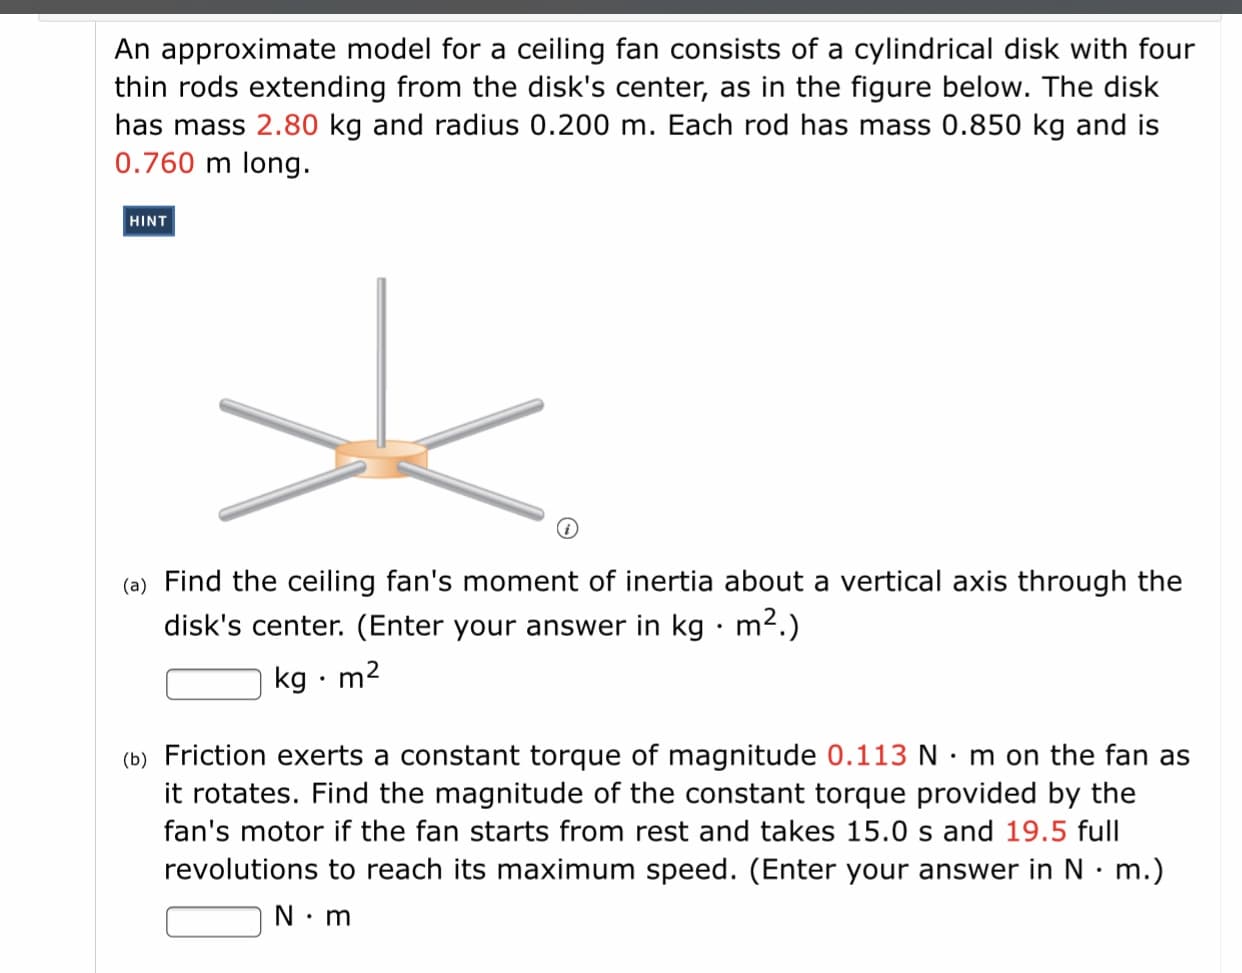 An approximate model for a ceiling fan consists of a cylindrical disk with four
thin rods extending from the disk's center, as in the figure below. The disk
has mass 2.80 kg and radius 0.200 m. Each rod has mass 0.850 kg and is
0.760 m long.
